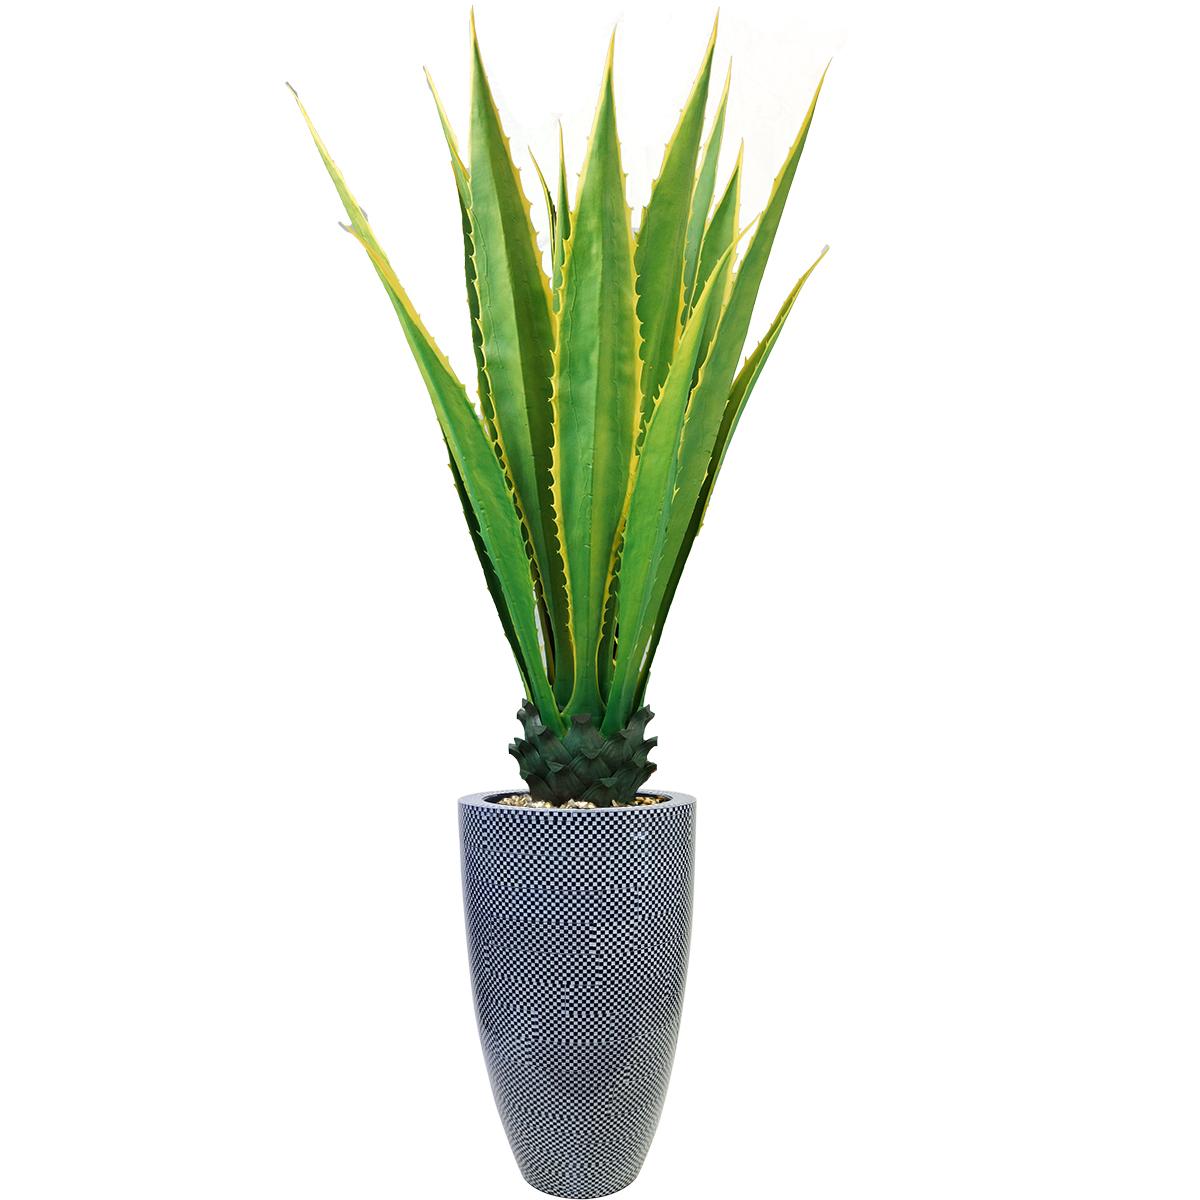 Vhx147223 69.5 In. Indoor & Outdoor Agave Plant In Resin Planter